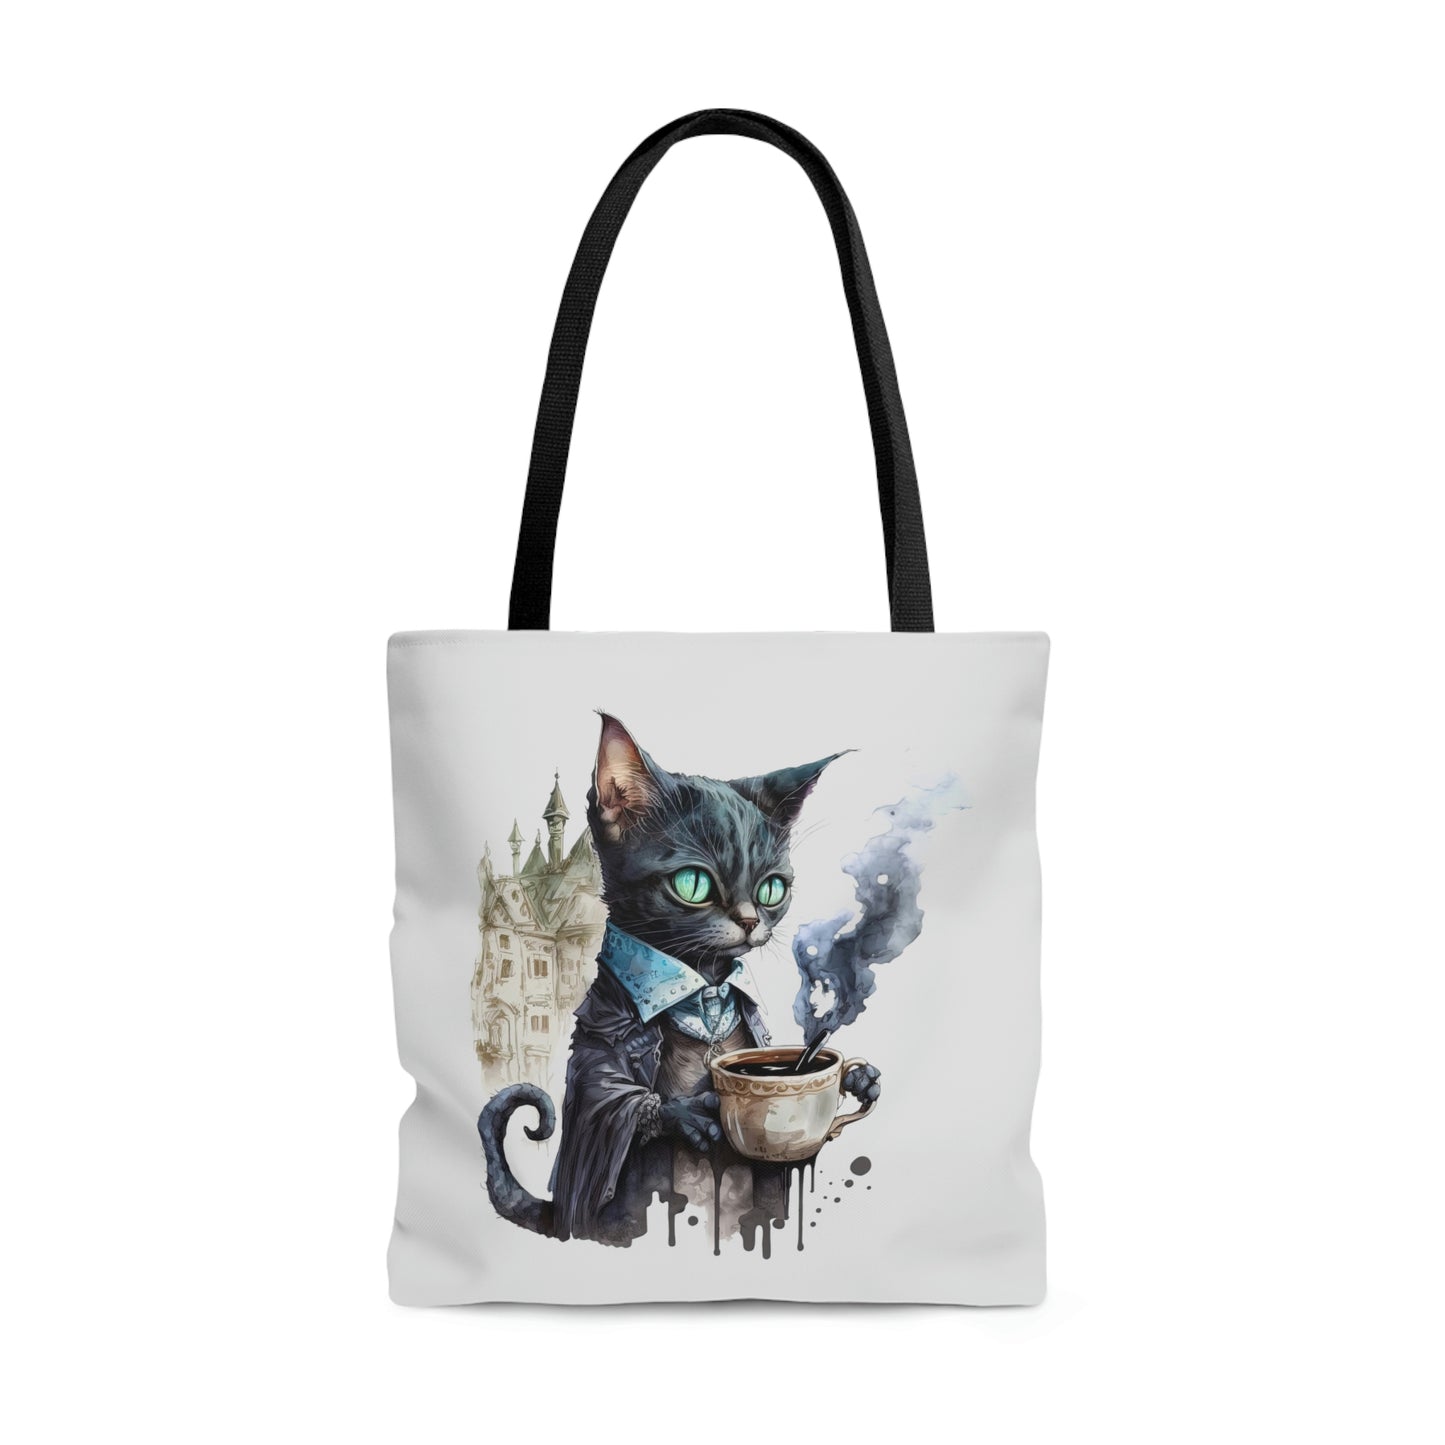 Goth Cat & Coffee Lovers Carry Bags for Book Lovers, Dual Printed, Book Reader Gift Ideas - Light Gray Large Eco Tote Bag